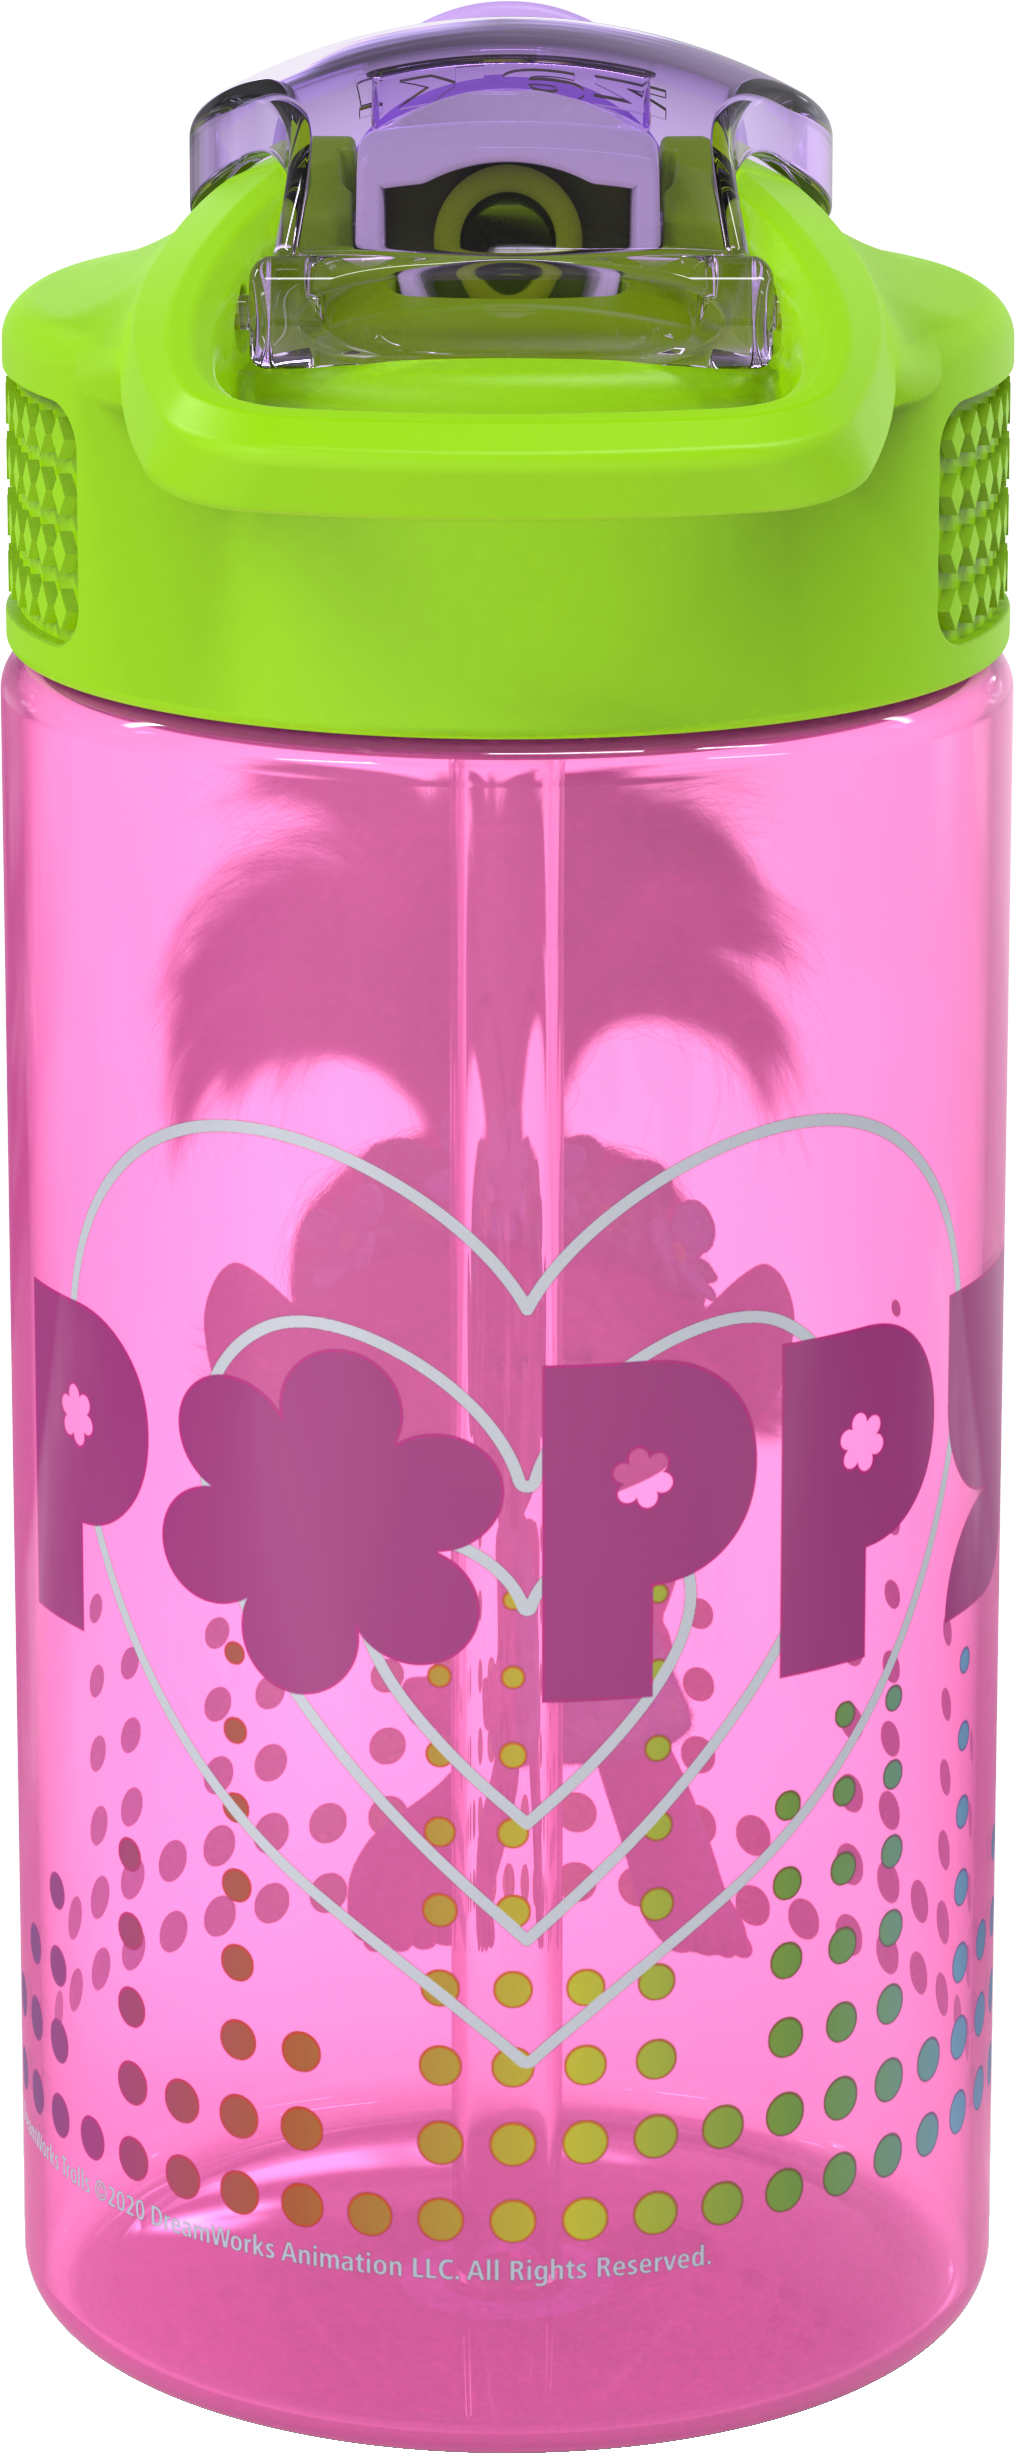 Trolls 2 Movie 16 ounce Reusable Plastic Water Bottle with Straw, Poppy, 2-piece set slideshow image 14